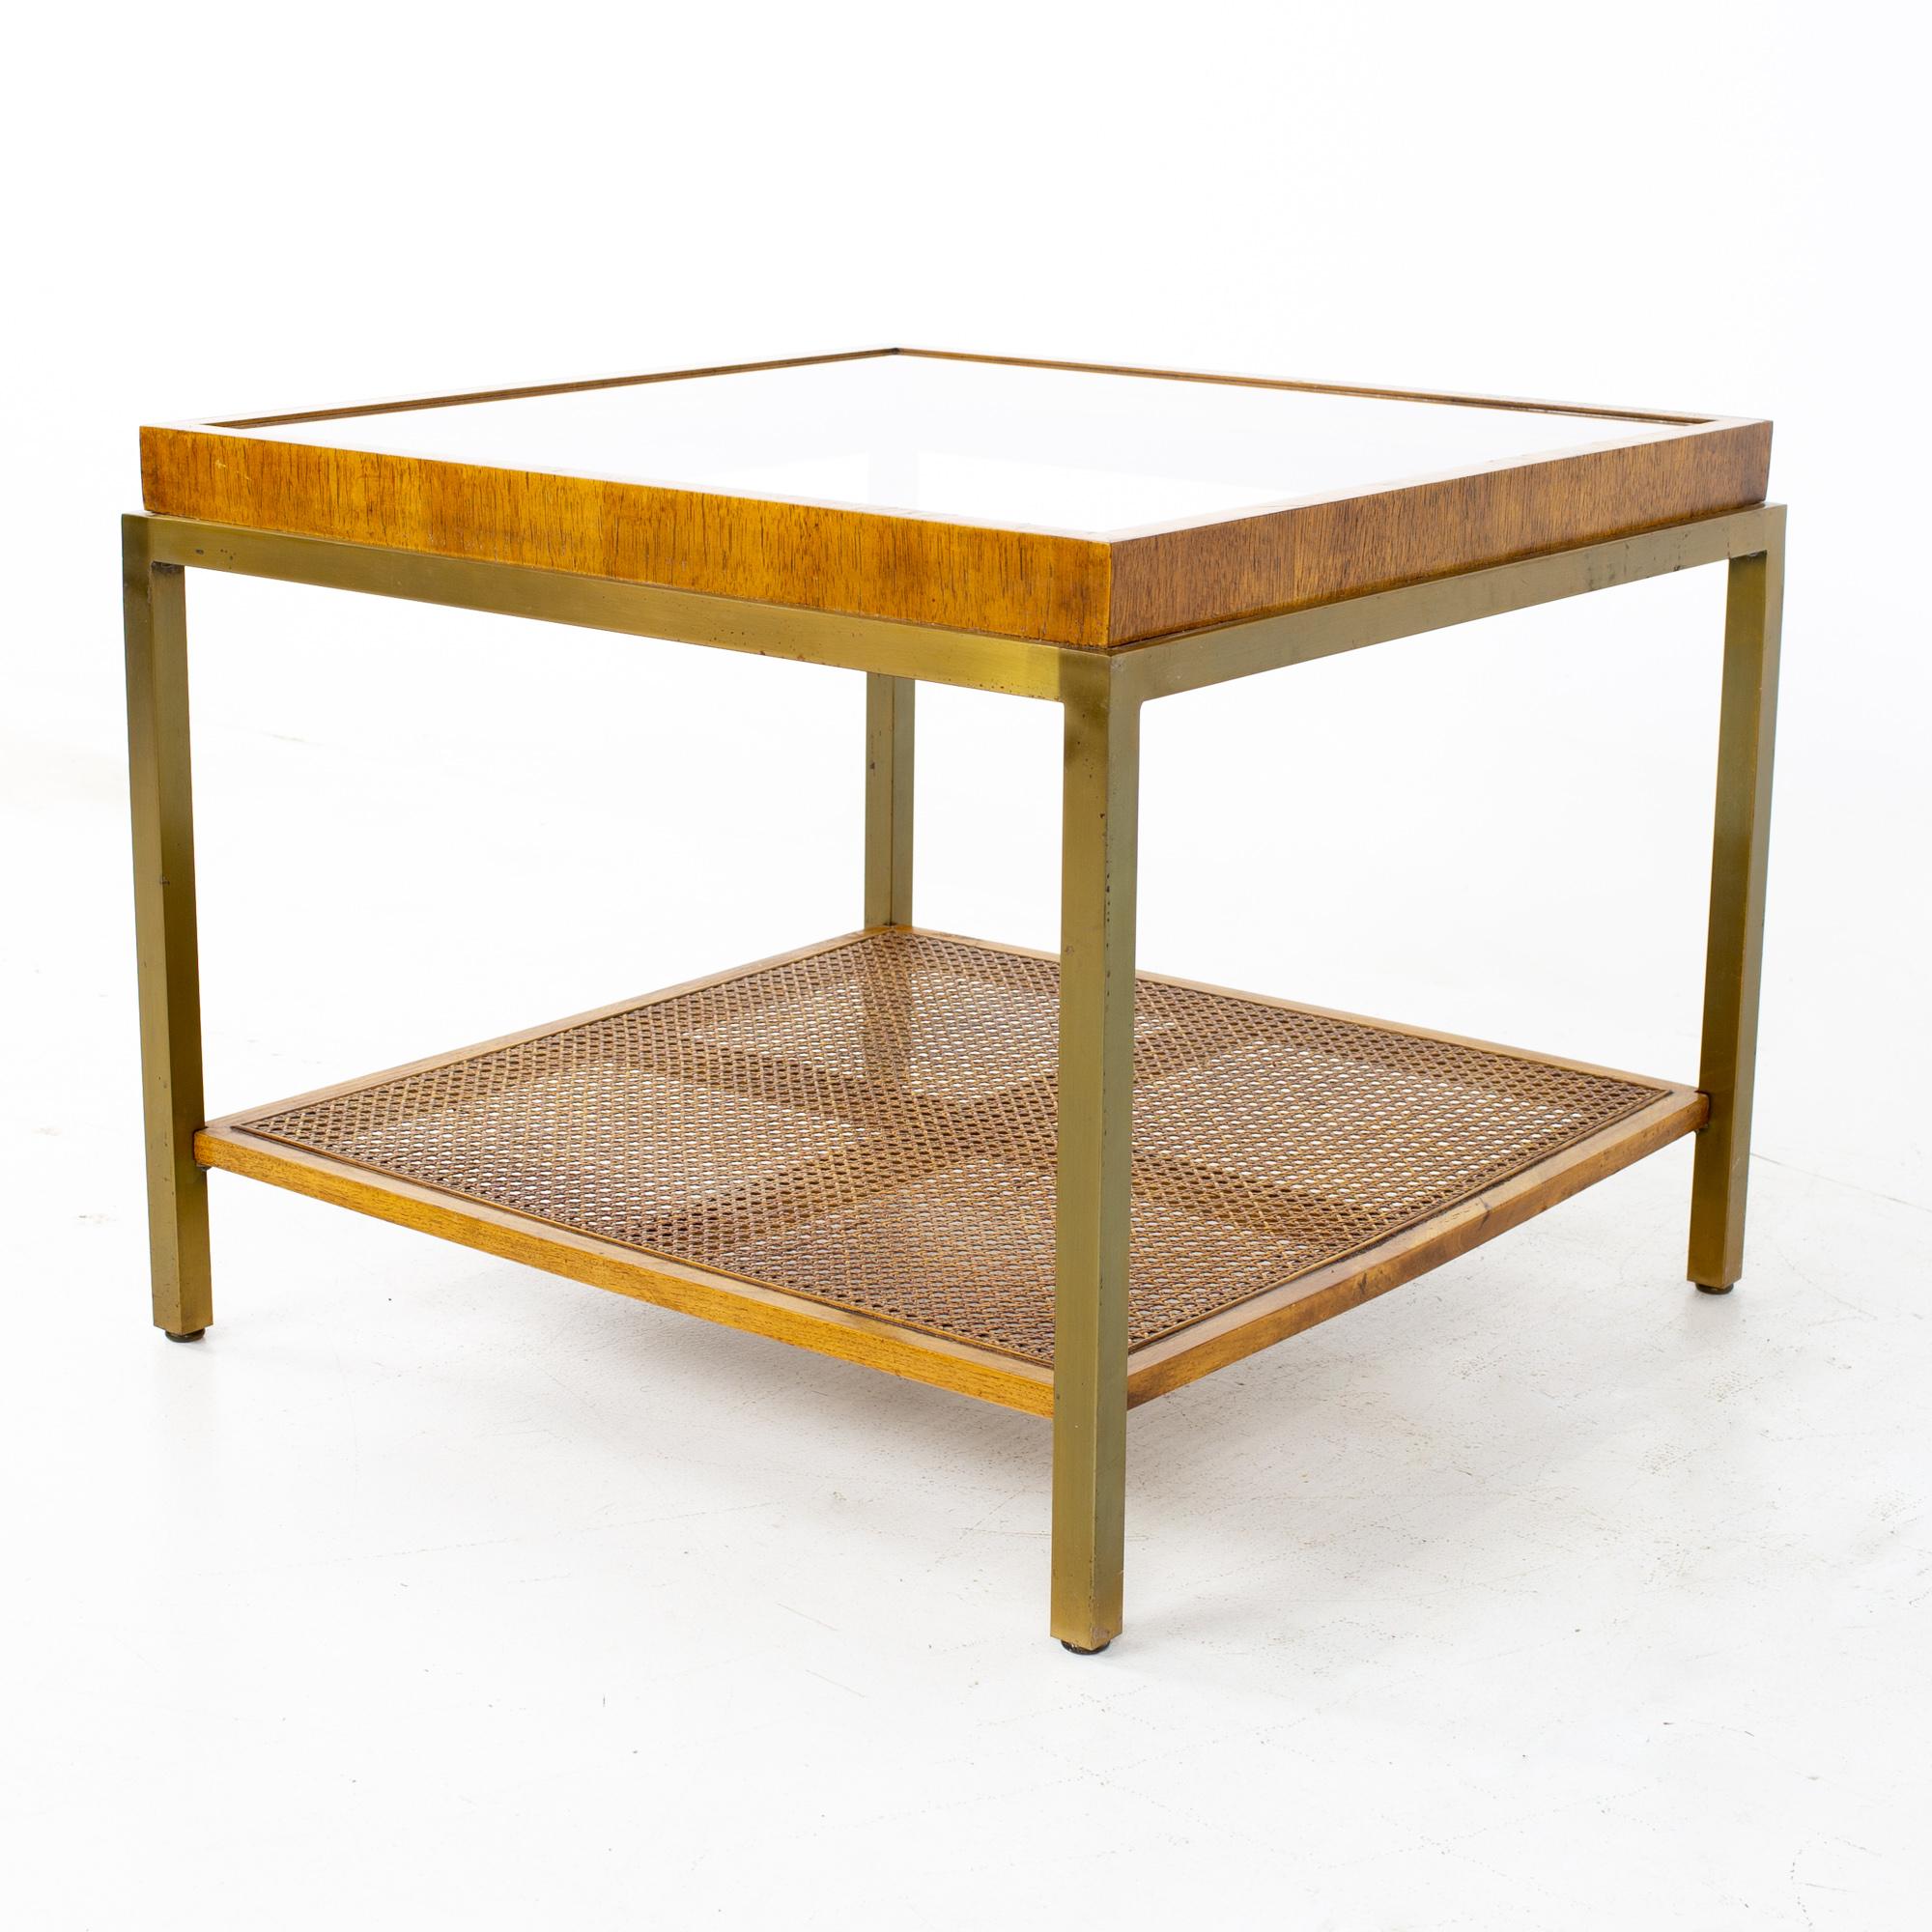 Drexel heritage mid century brass cane and glass side end table
This end table measures: 26 wide x 17 deep x 21 inches high

All pieces of furniture can be had in what we call restored vintage condition. That means the piece is restored upon